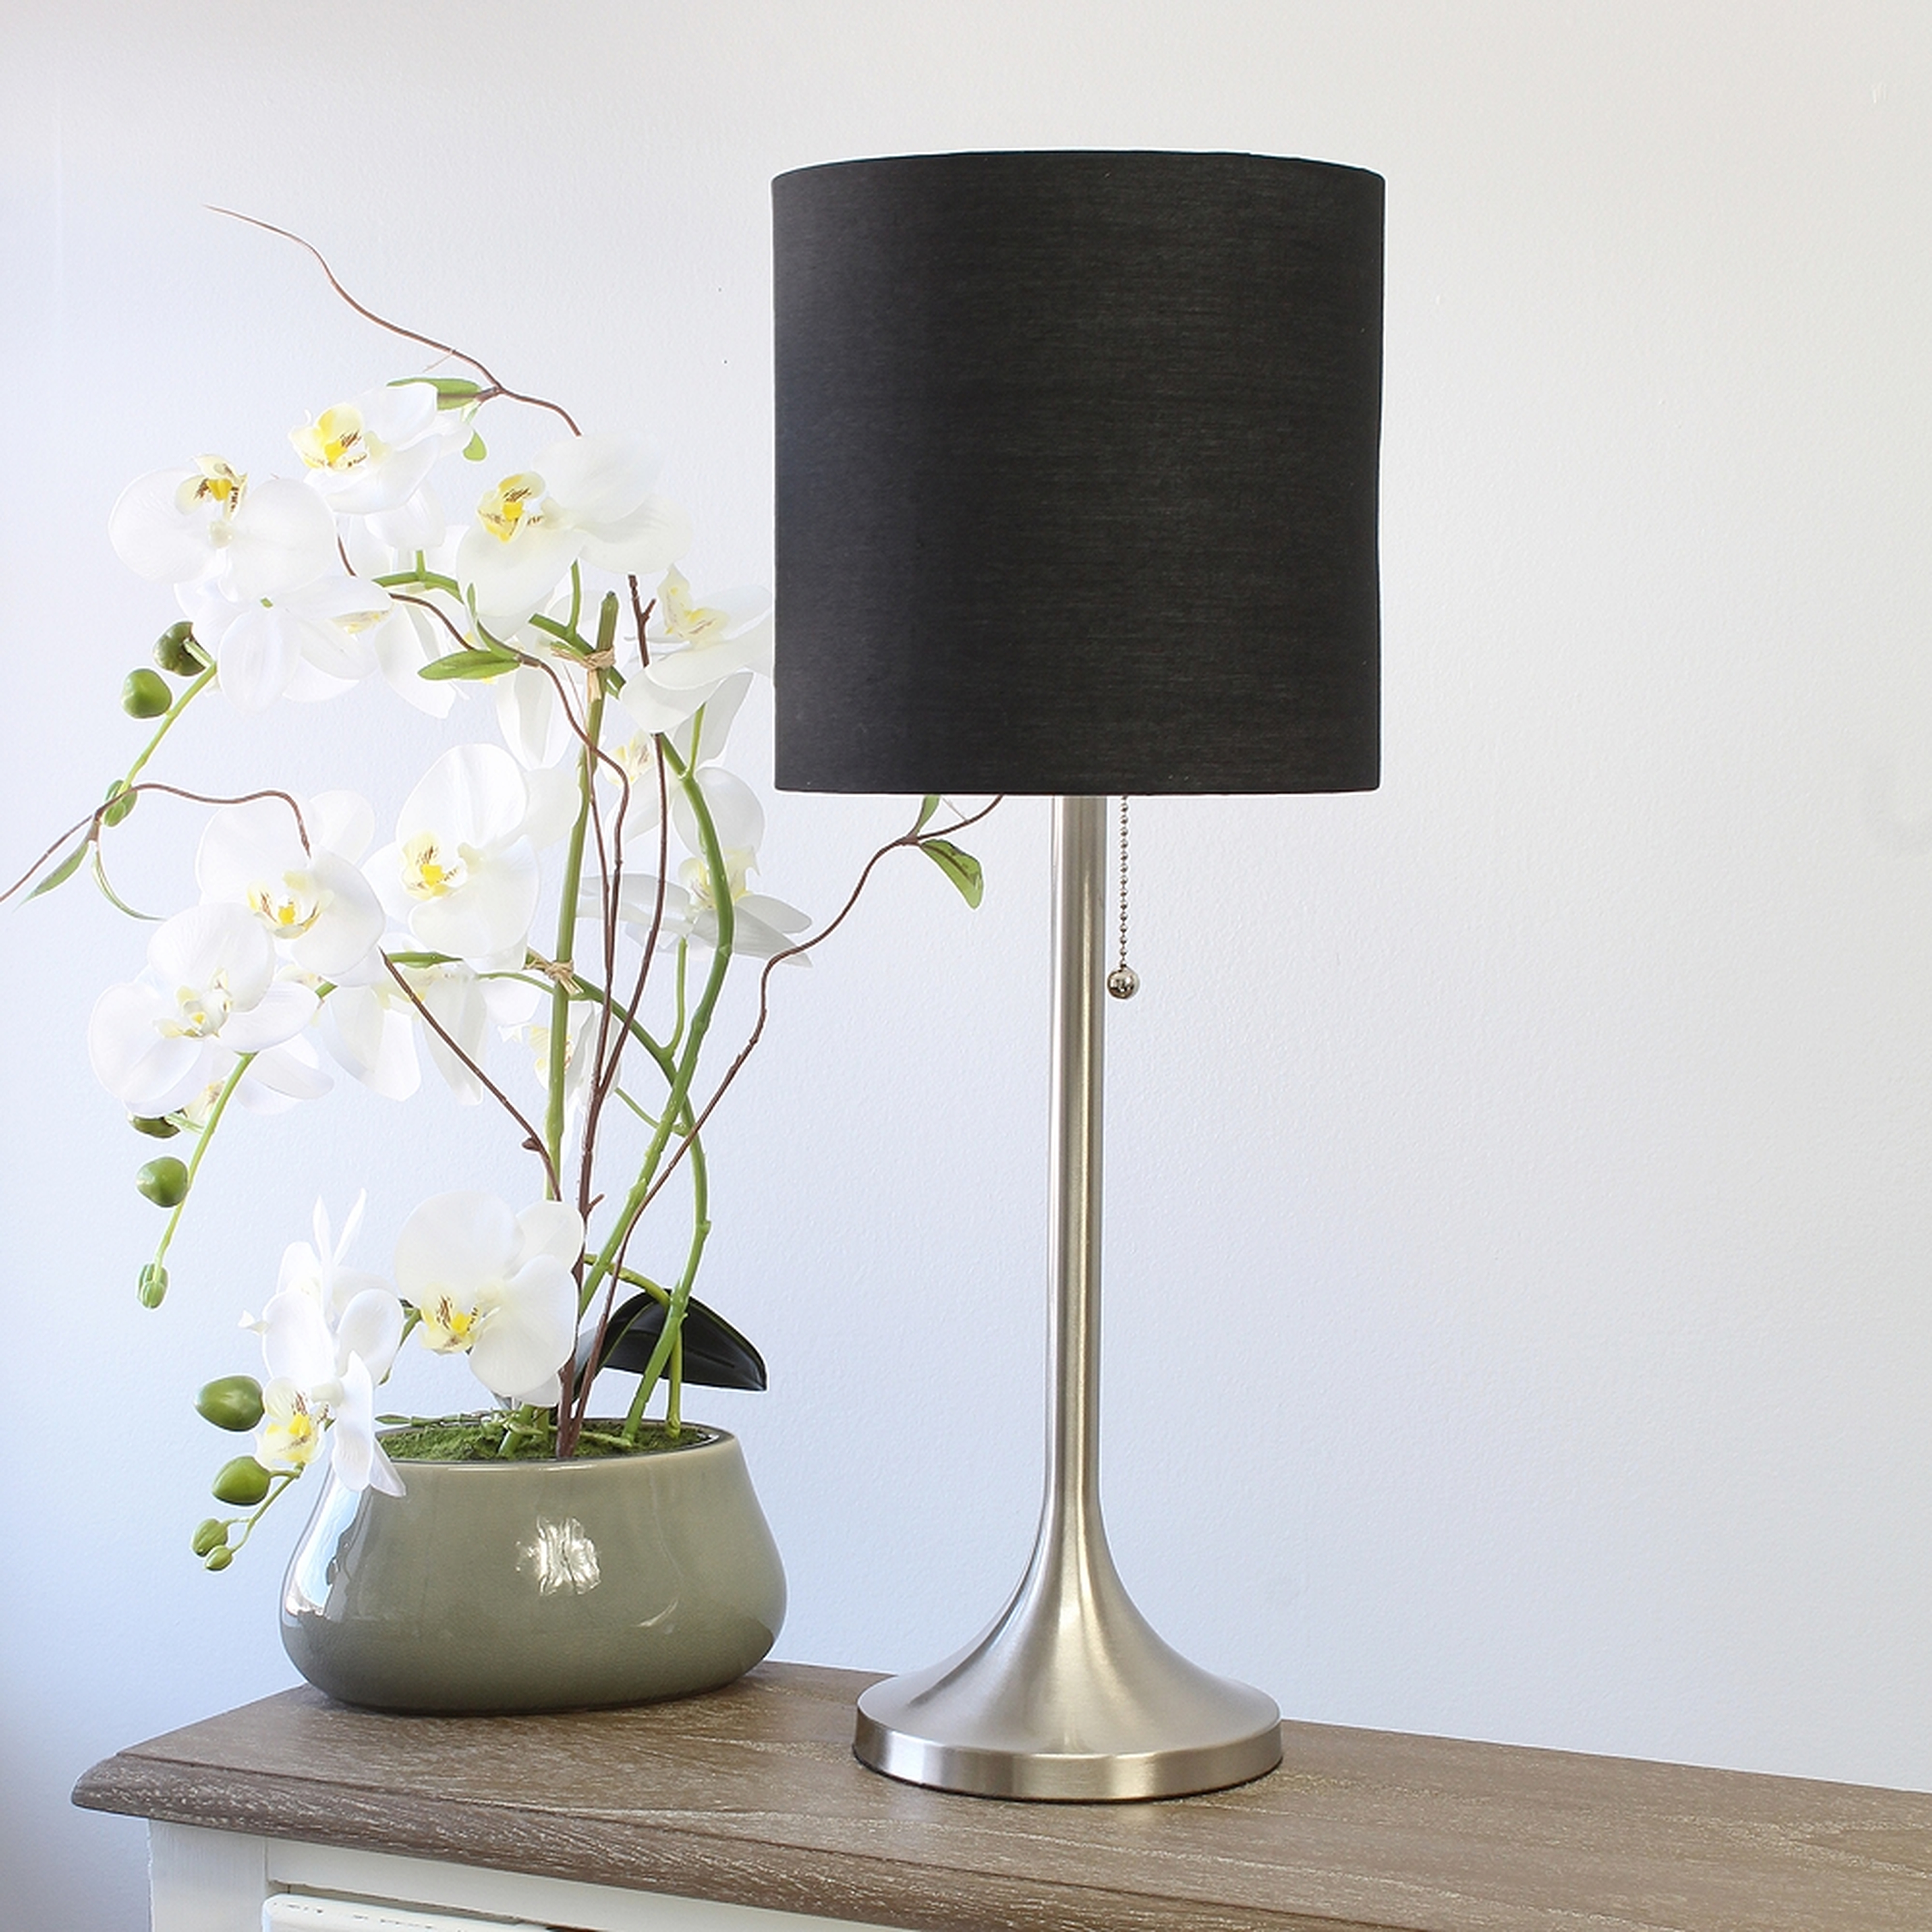 Simple Designs Nickel Accent Table Lamp with Black Shade - Style # 85W68 - Lamps Plus